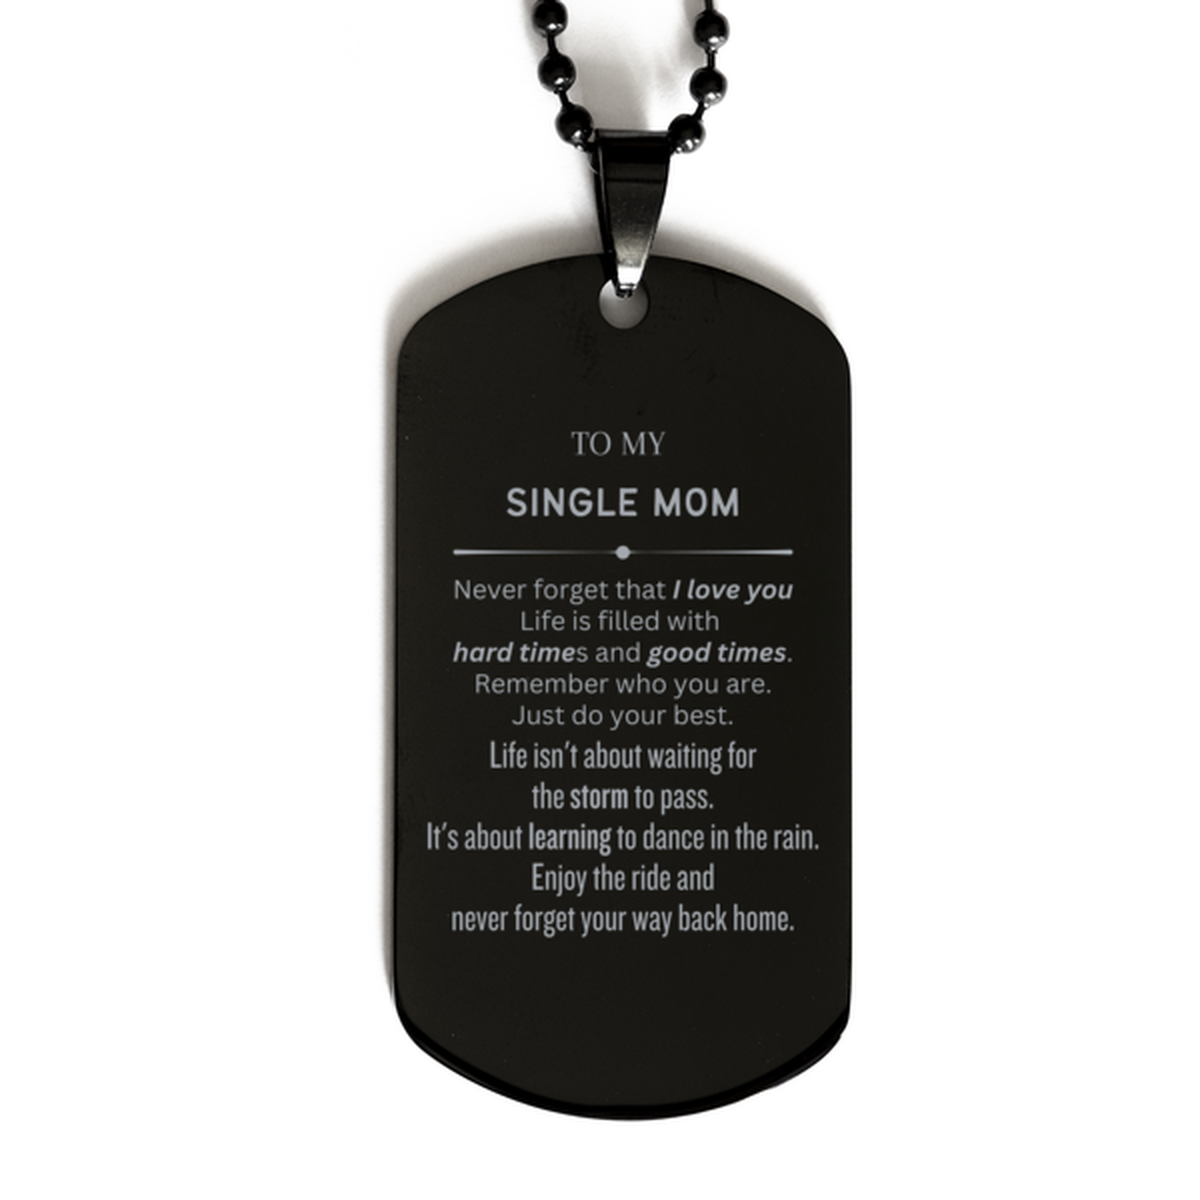 Christmas Single Mom Black Dog Tag Gifts, To My Single Mom Birthday Thank You Gifts For Single Mom, Graduation Unique Gifts For Single Mom To My Single Mom Never forget that I love you life is filled with hard times and good times. Remember who you are. J